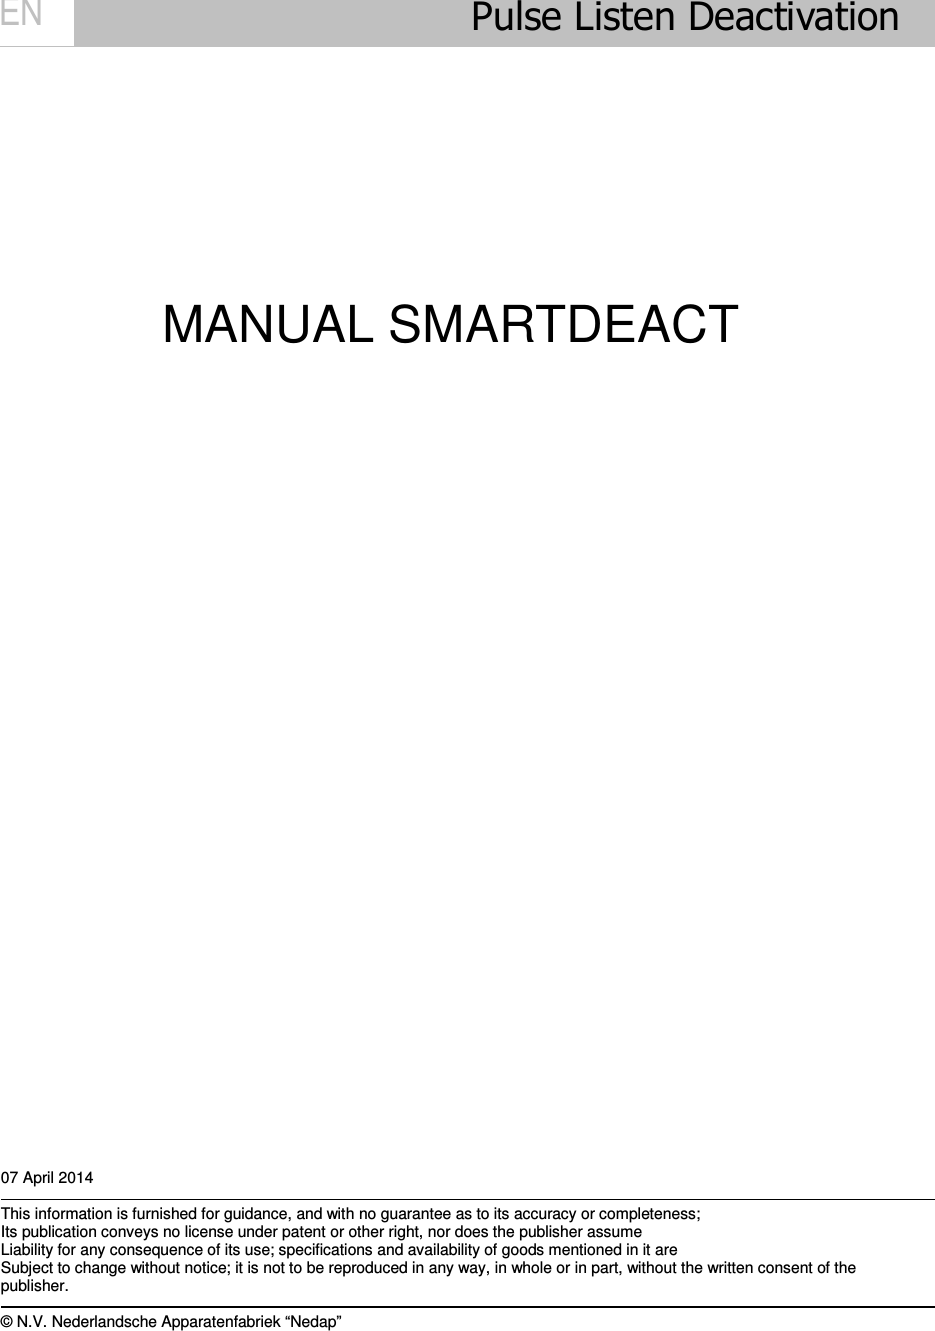      Pulse Listen Deactivation               MANUAL SMARTDEACT                                              07 April 2014  This information is furnished for guidance, and with no guarantee as to its accuracy or completeness; Its publication conveys no license under patent or other right, nor does the publisher assume Liability for any consequence of its use; specifications and availability of goods mentioned in it are Subject to change without notice; it is not to be reproduced in any way, in whole or in part, without the written consent of the publisher.  © N.V. Nederlandsche Apparatenfabriek “Nedap” EN 